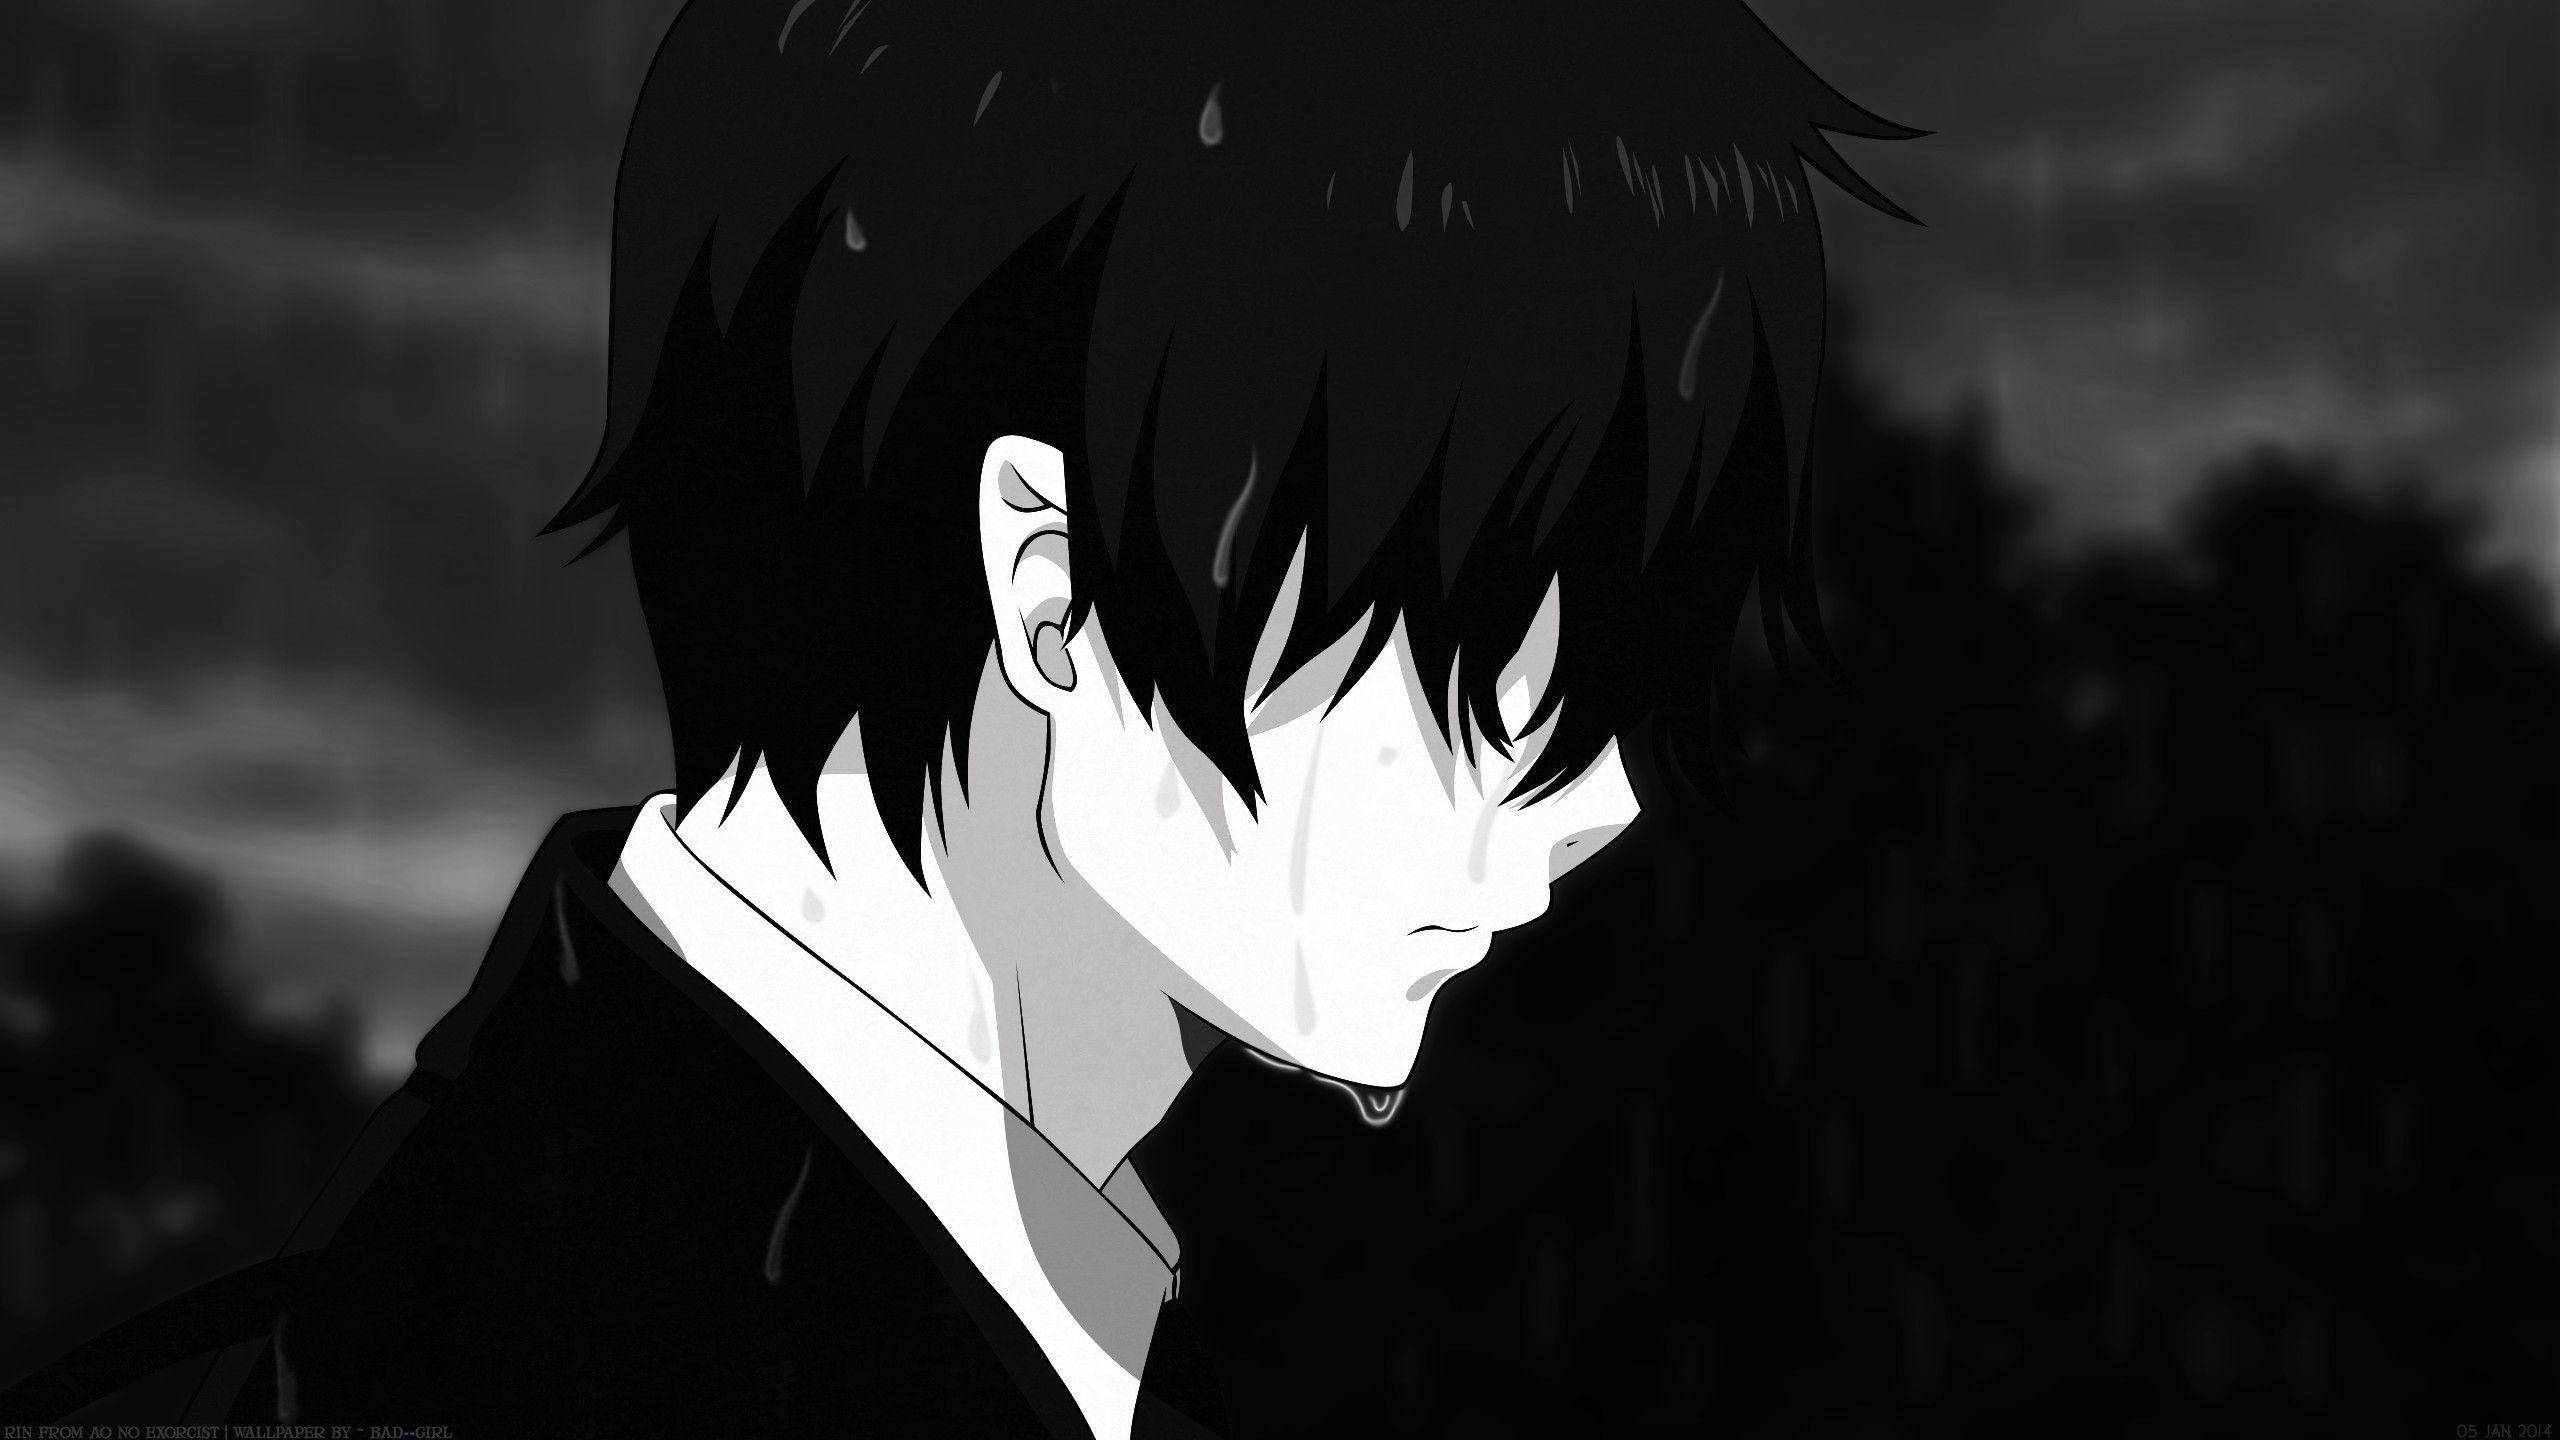 Download Cute Black And White Aesthetic Anime Boy Crying Wallpaper |  